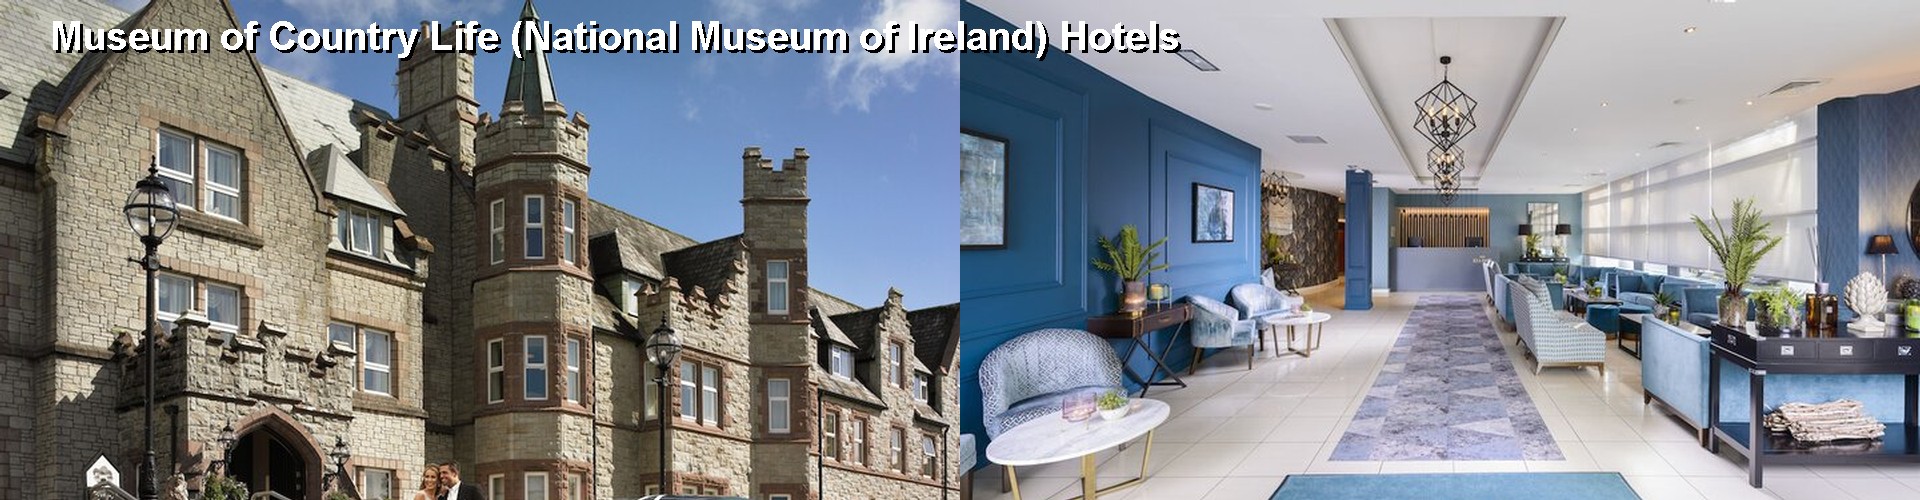 5 Best Hotels near Museum of Country Life (National Museum of Ireland)